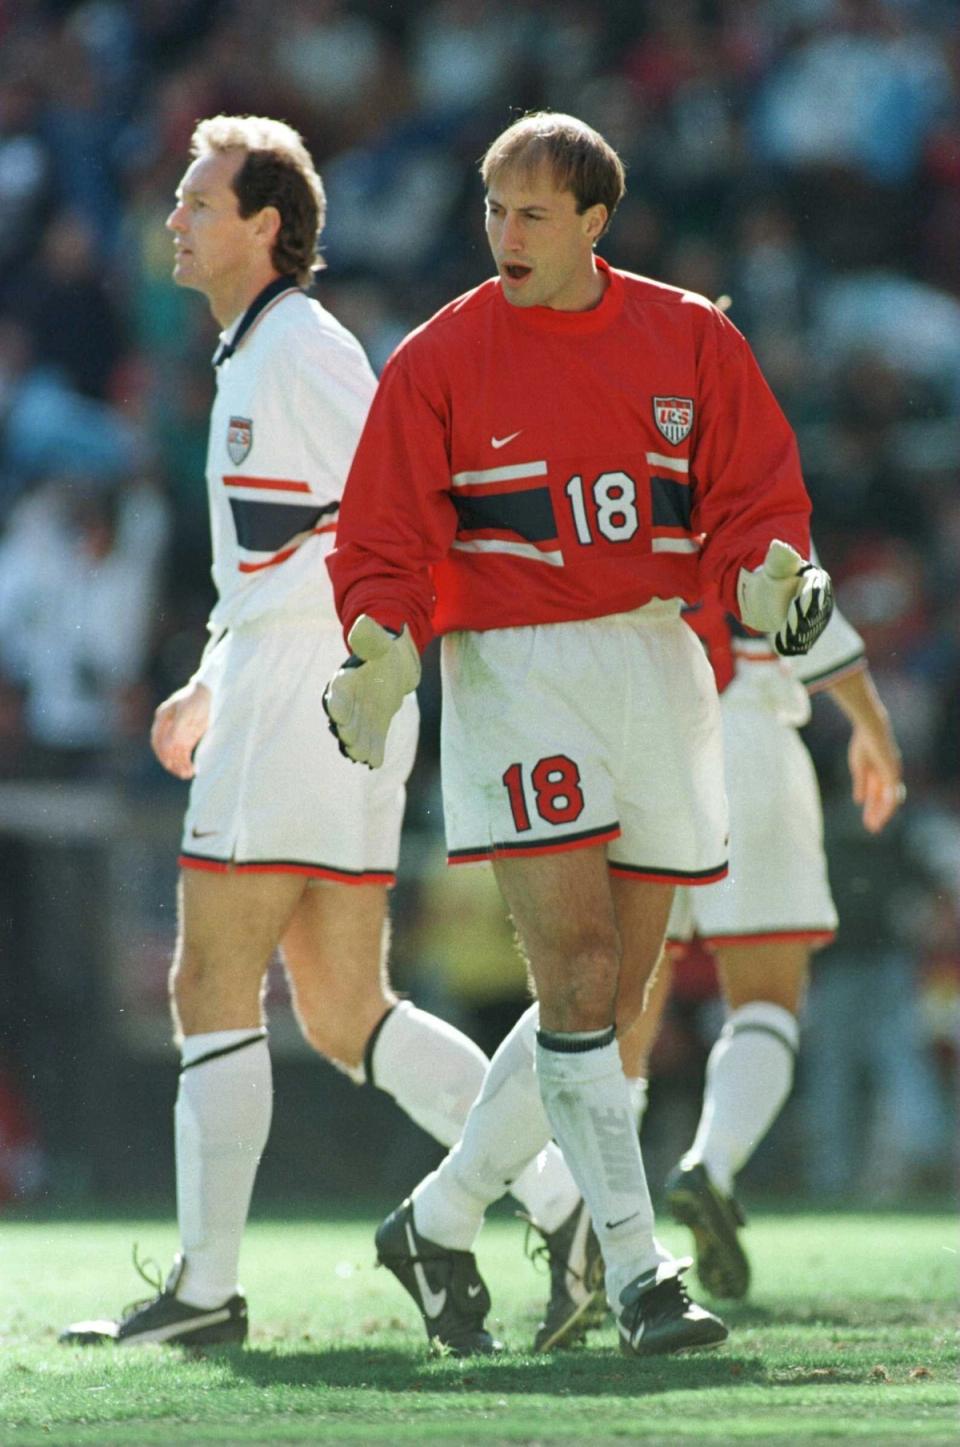 goalkeeper kasey keller in red jersey and white shorts